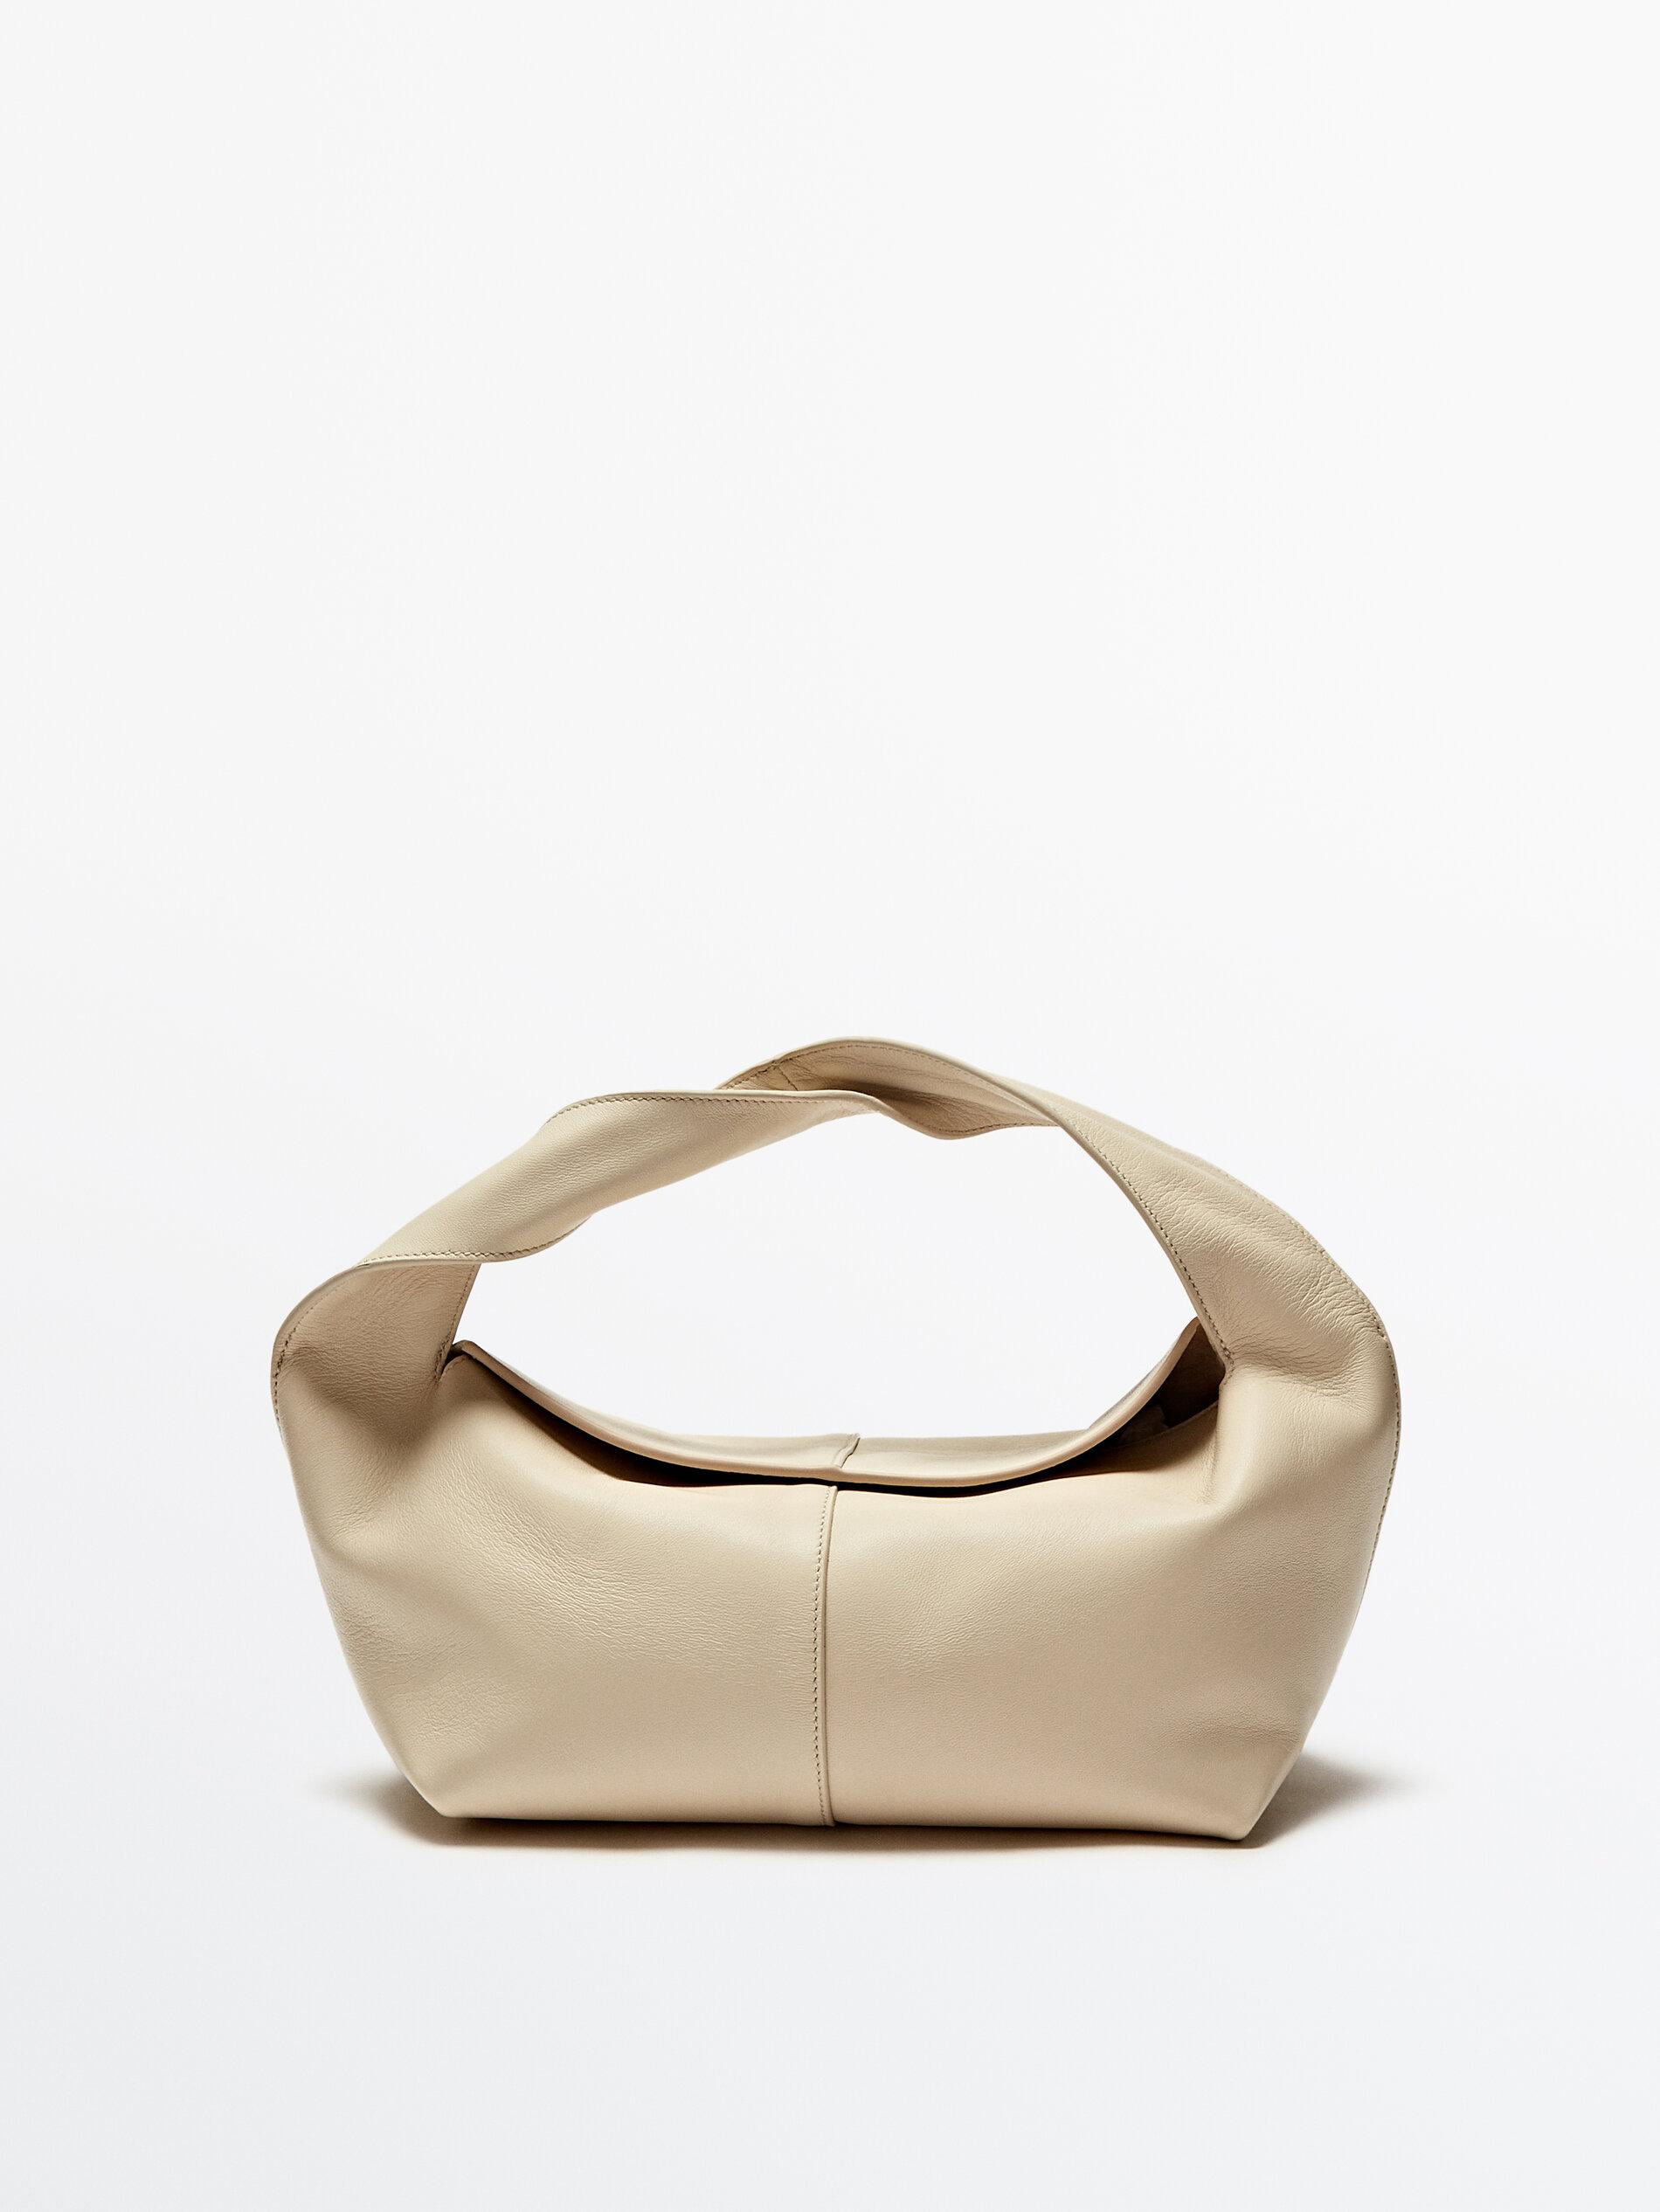 MASSIMO DUTTI Nappa Leather Croissant Bag in Natural | Lyst